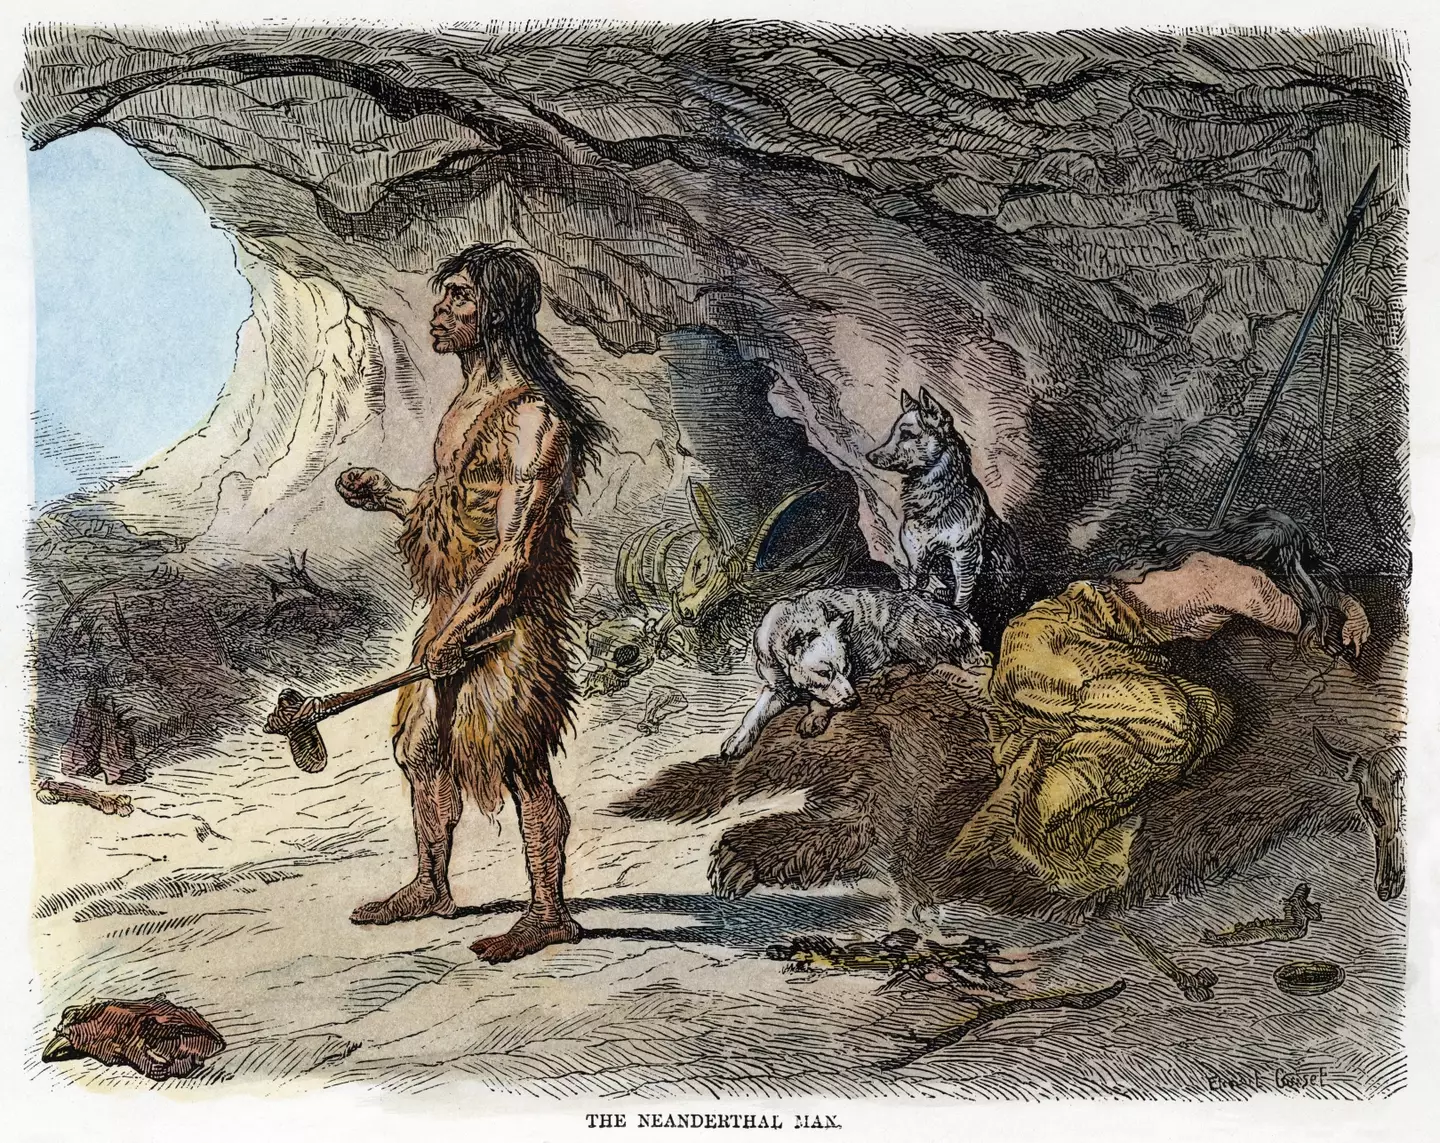 Neanderthals and humans actually lived side by side.